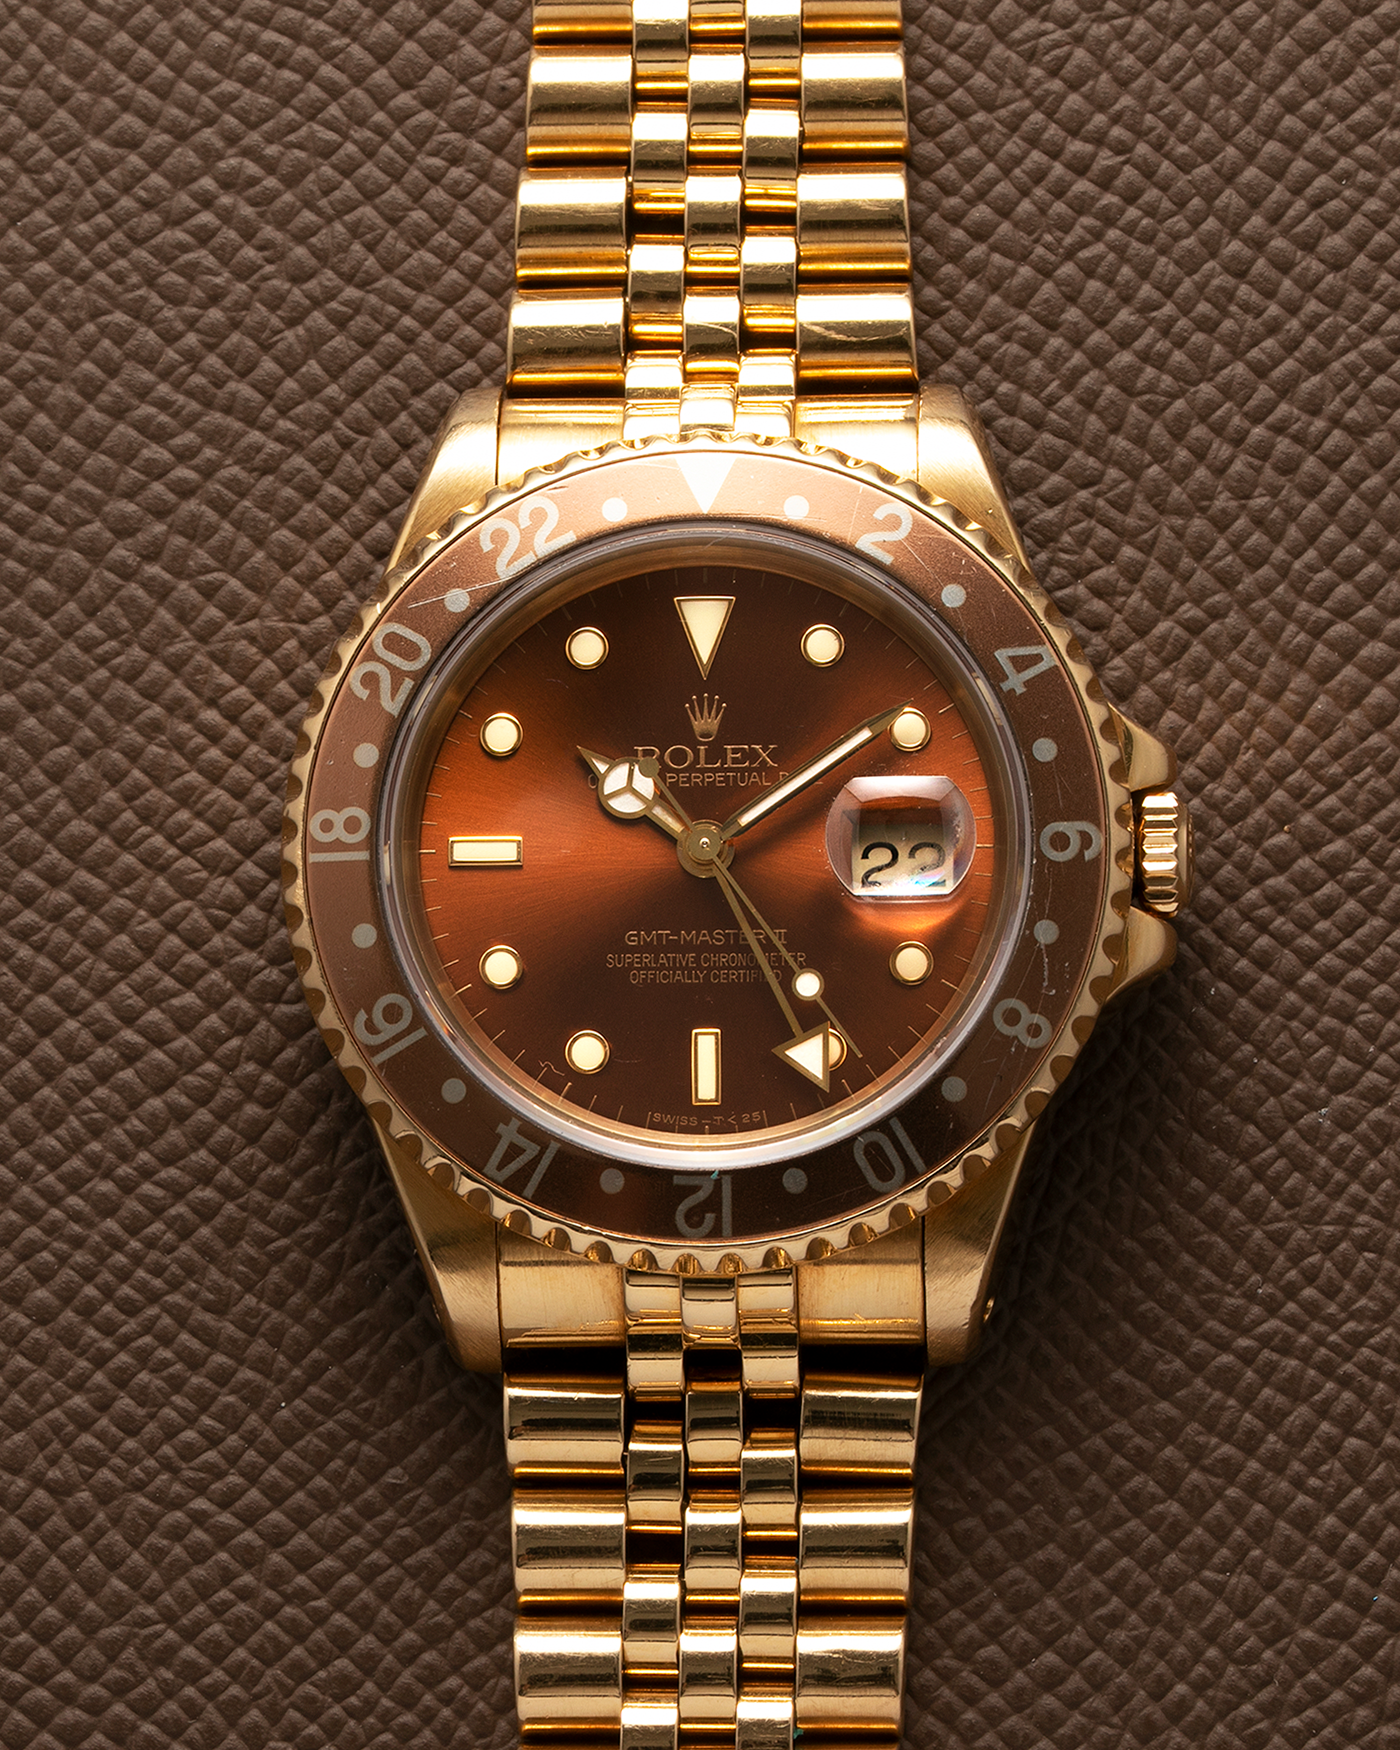 Brand: Rolex Year: 1994 Model: GMT Master II Reference Number: 16718 Serial Number: N281XXX Material: 18-carat Yellow Gold Movement: Rolex Cal. 3185, Self-Winding Case Diameter: 40mm Bracelet: Rolex 18-carat Yellow Gold 8386 Jubilee Bracelet with 47B Curved End Links